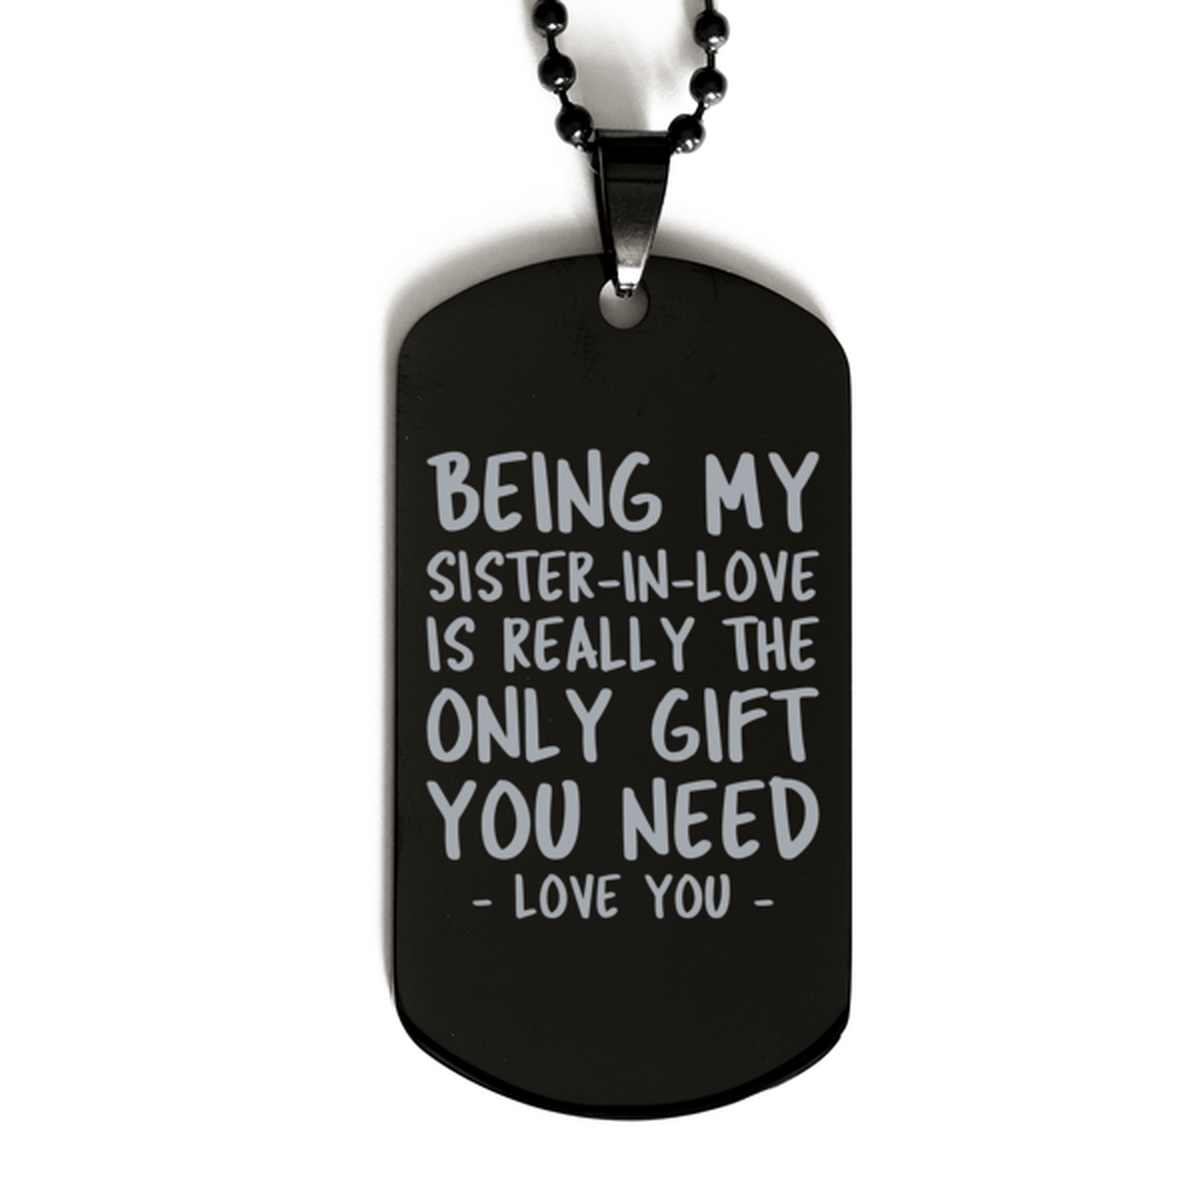 Funny Sister-in-love Black Dog Tag Necklace, Being My Sister-in-love Is Really the Only Gift You Need, Best Birthday Gifts for Sister-in-love